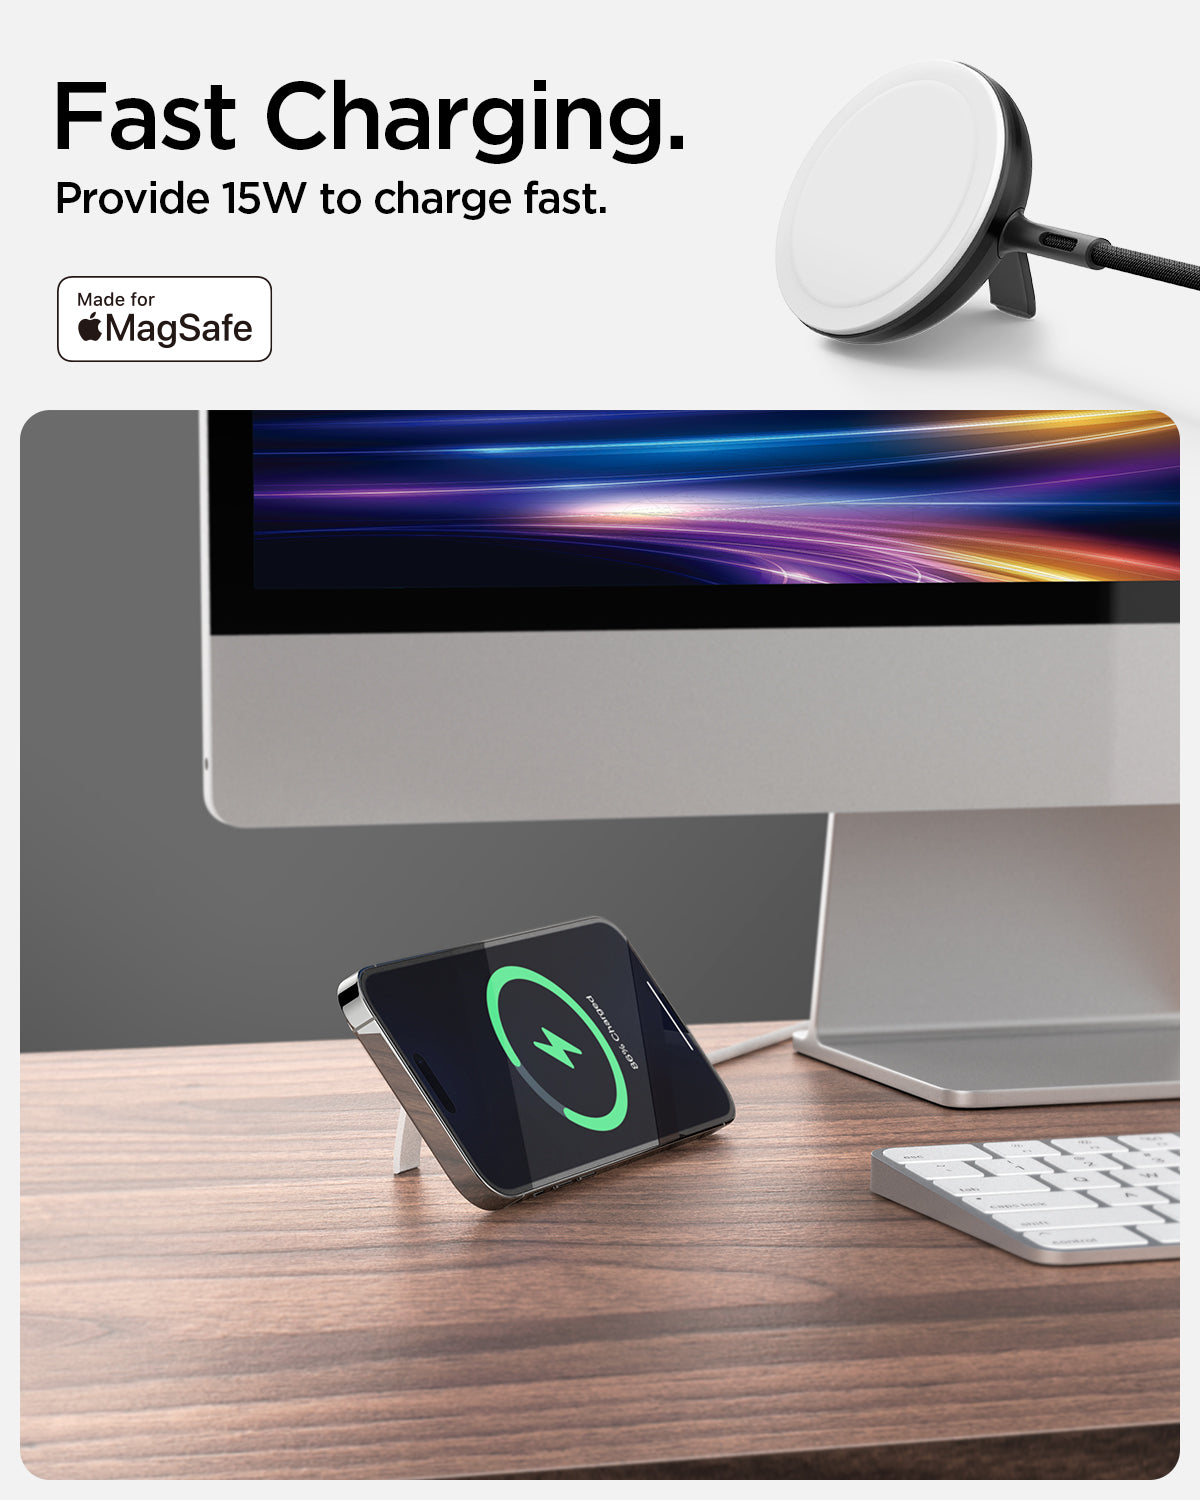 ACH05429 - ArcField™ Magnetic 15W Wireless Charger PF2200 (MagFit) in Black showing the Fast Charging. Provide 15W to charge fast. Magsafe Charger and devices